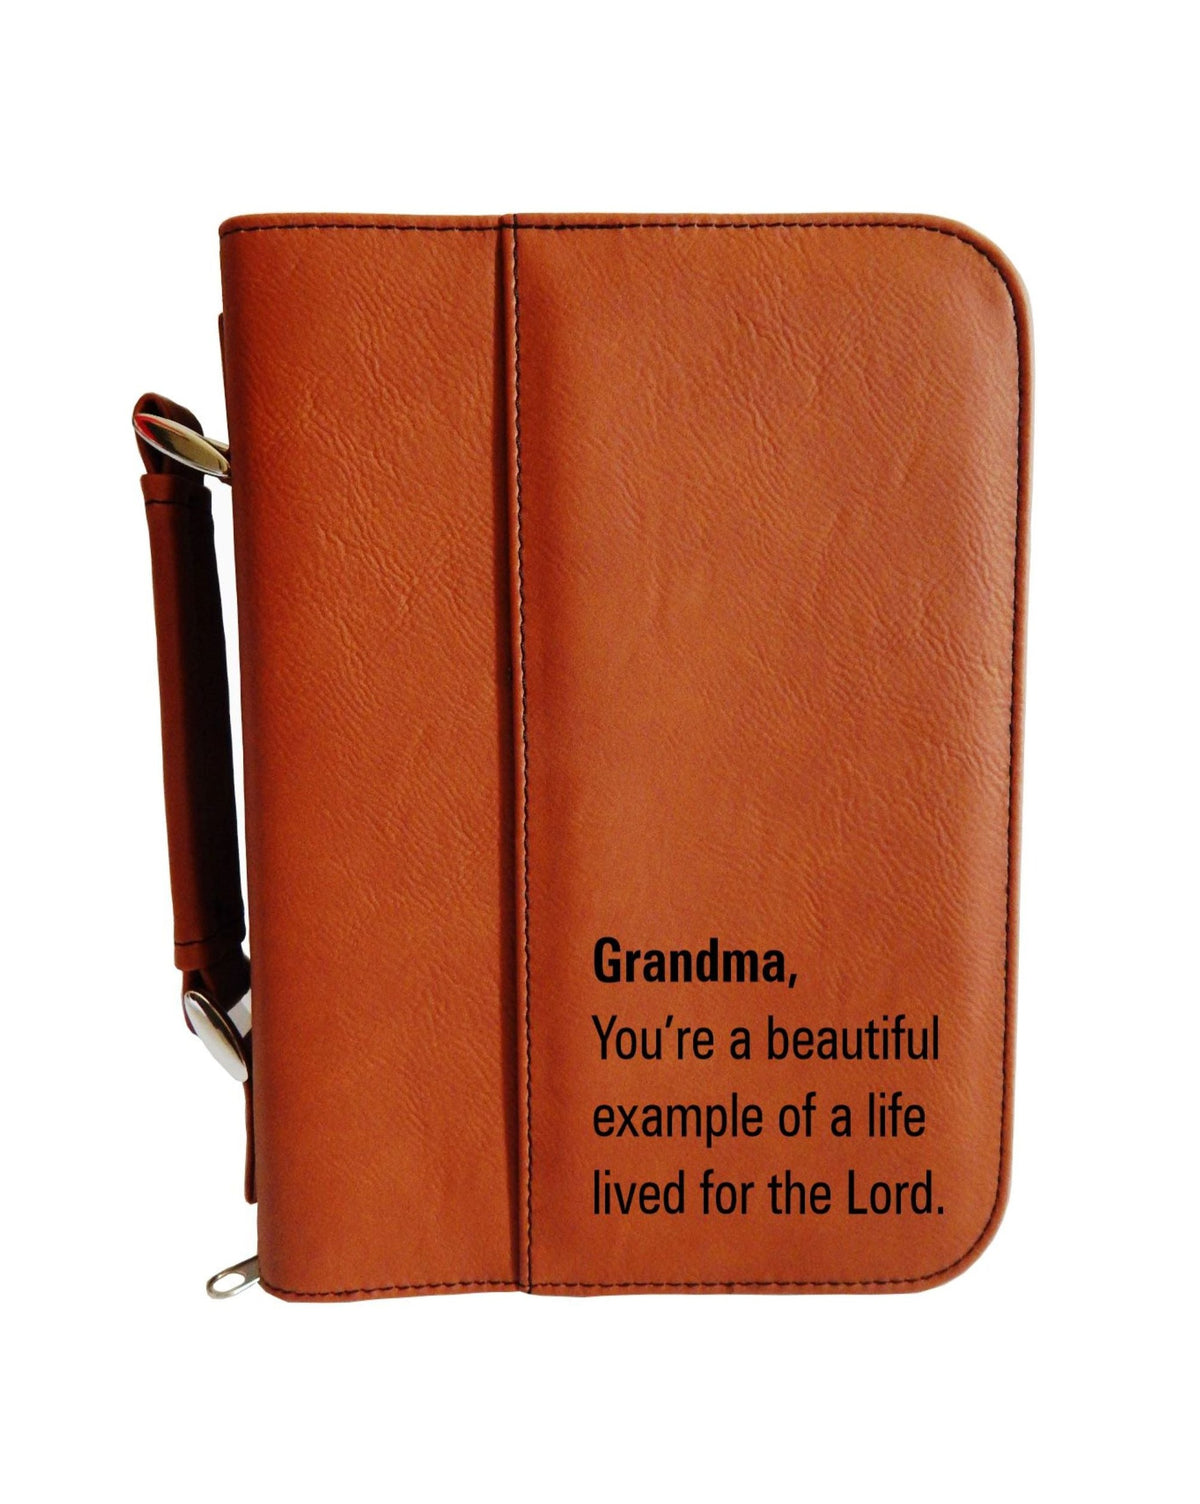 Grandmother Gift | Religious Gifts for Grandma | Engraved Bible Cover BCL033